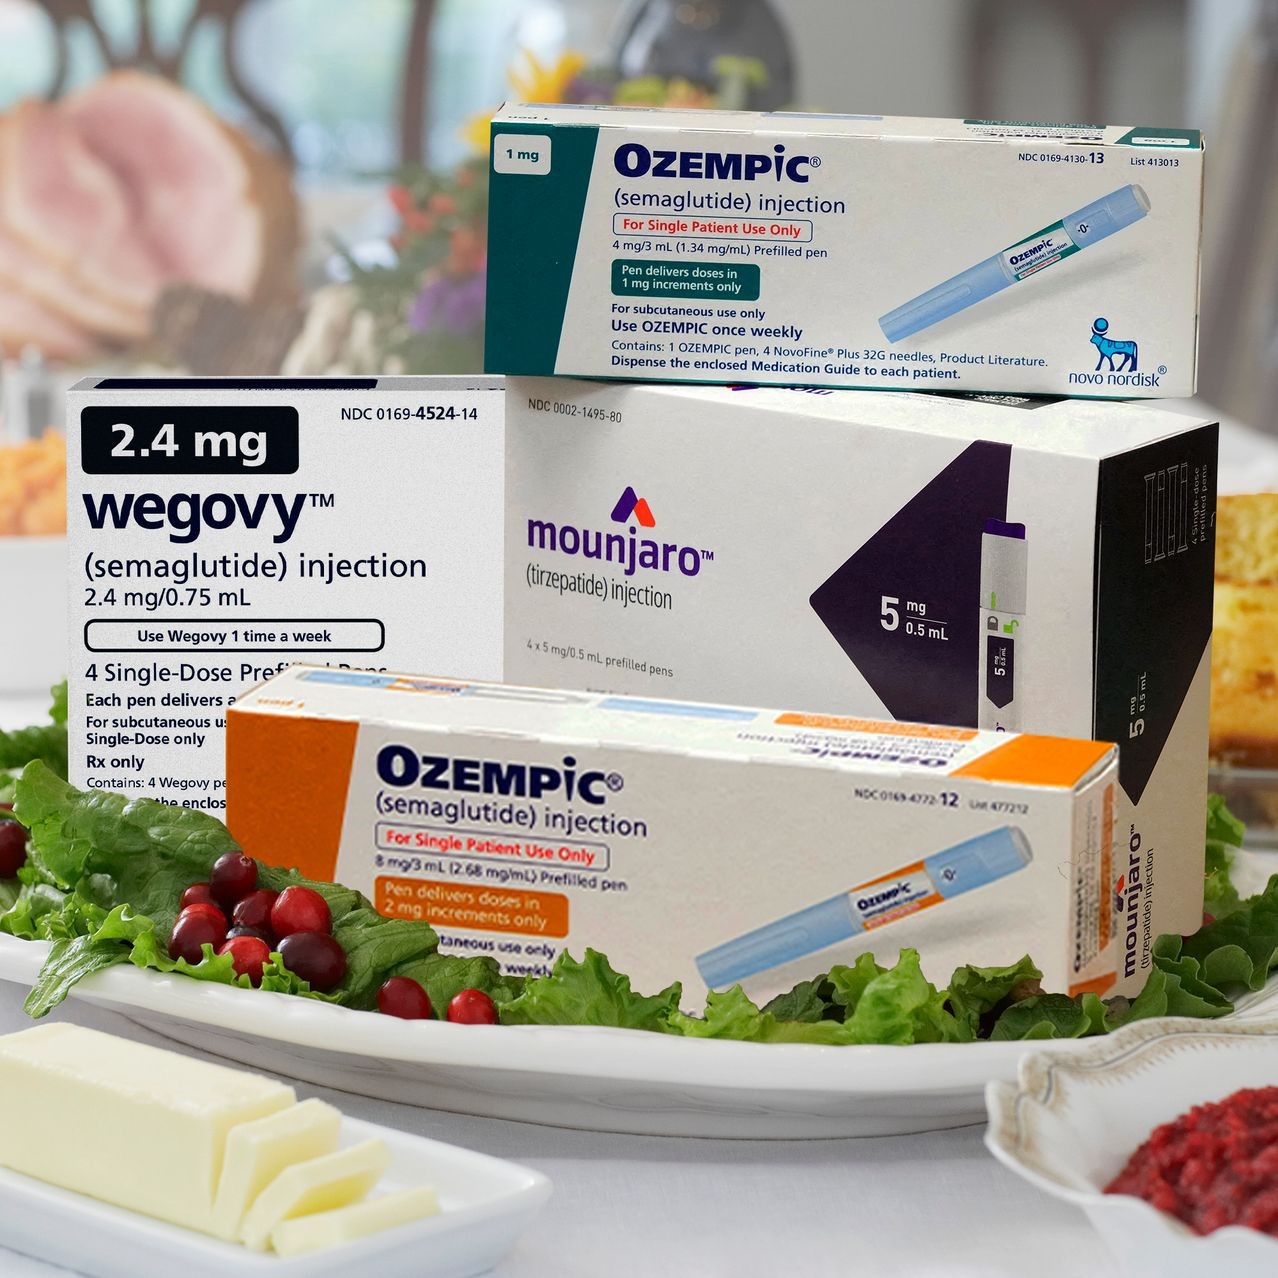 Whatsapp +61279120109 2 mg ozempic for weight loss,ozempic buy usa